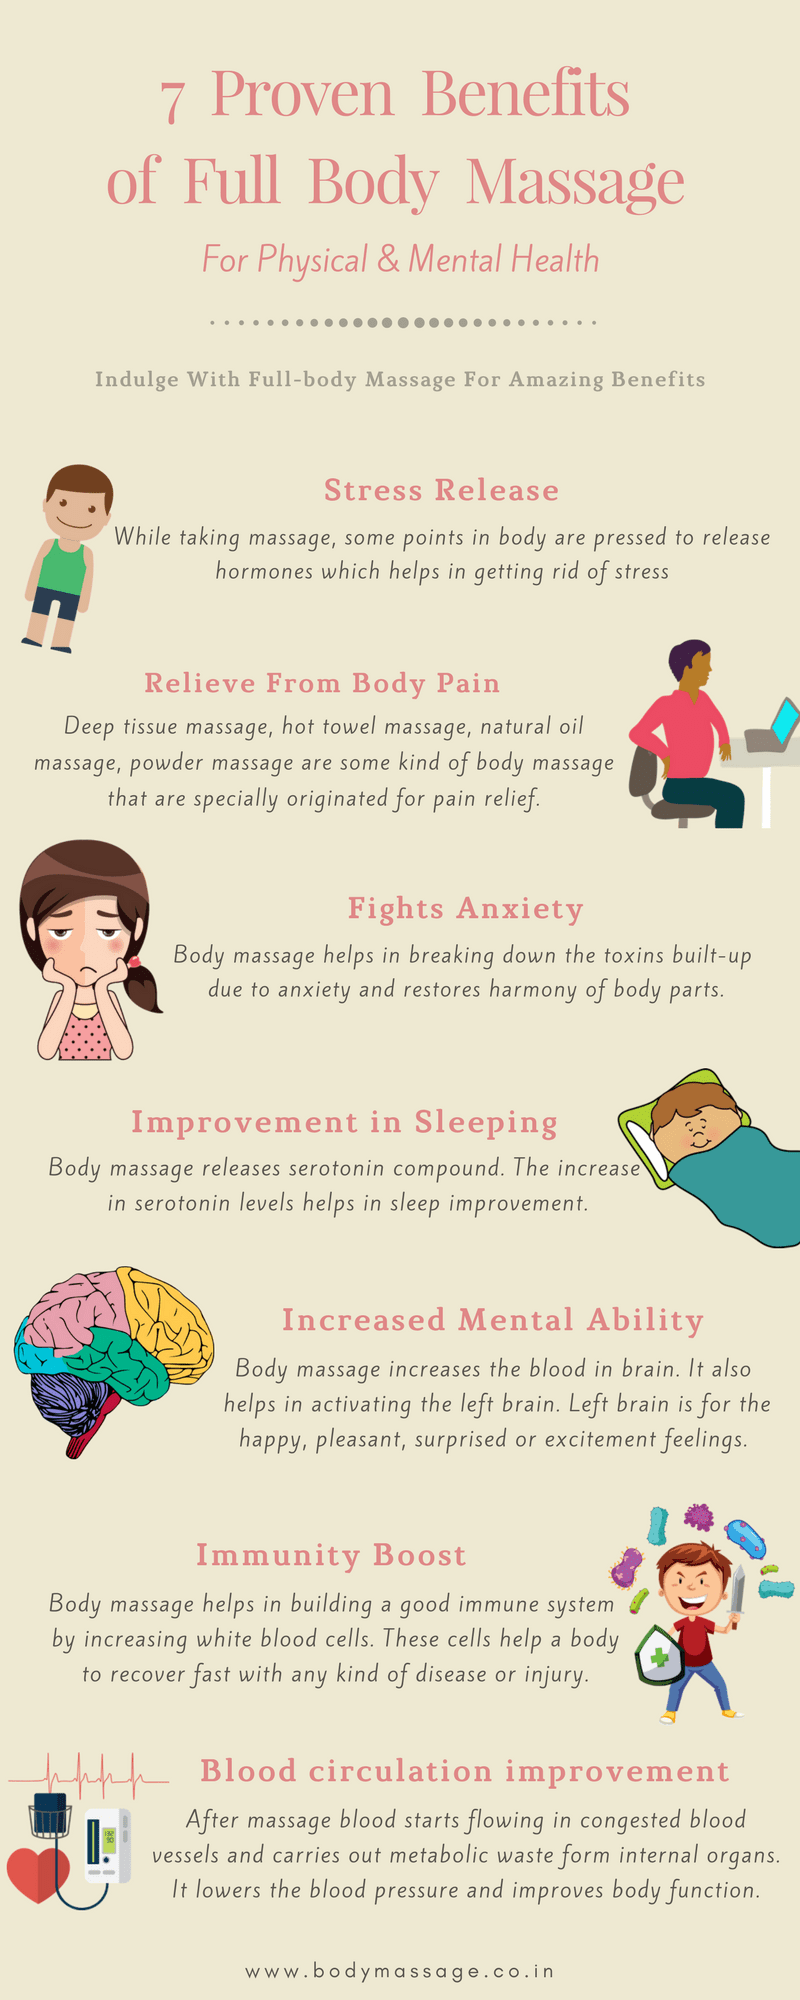 7 Proven Benefits Of Full Body Massage For Physical And Mental Health